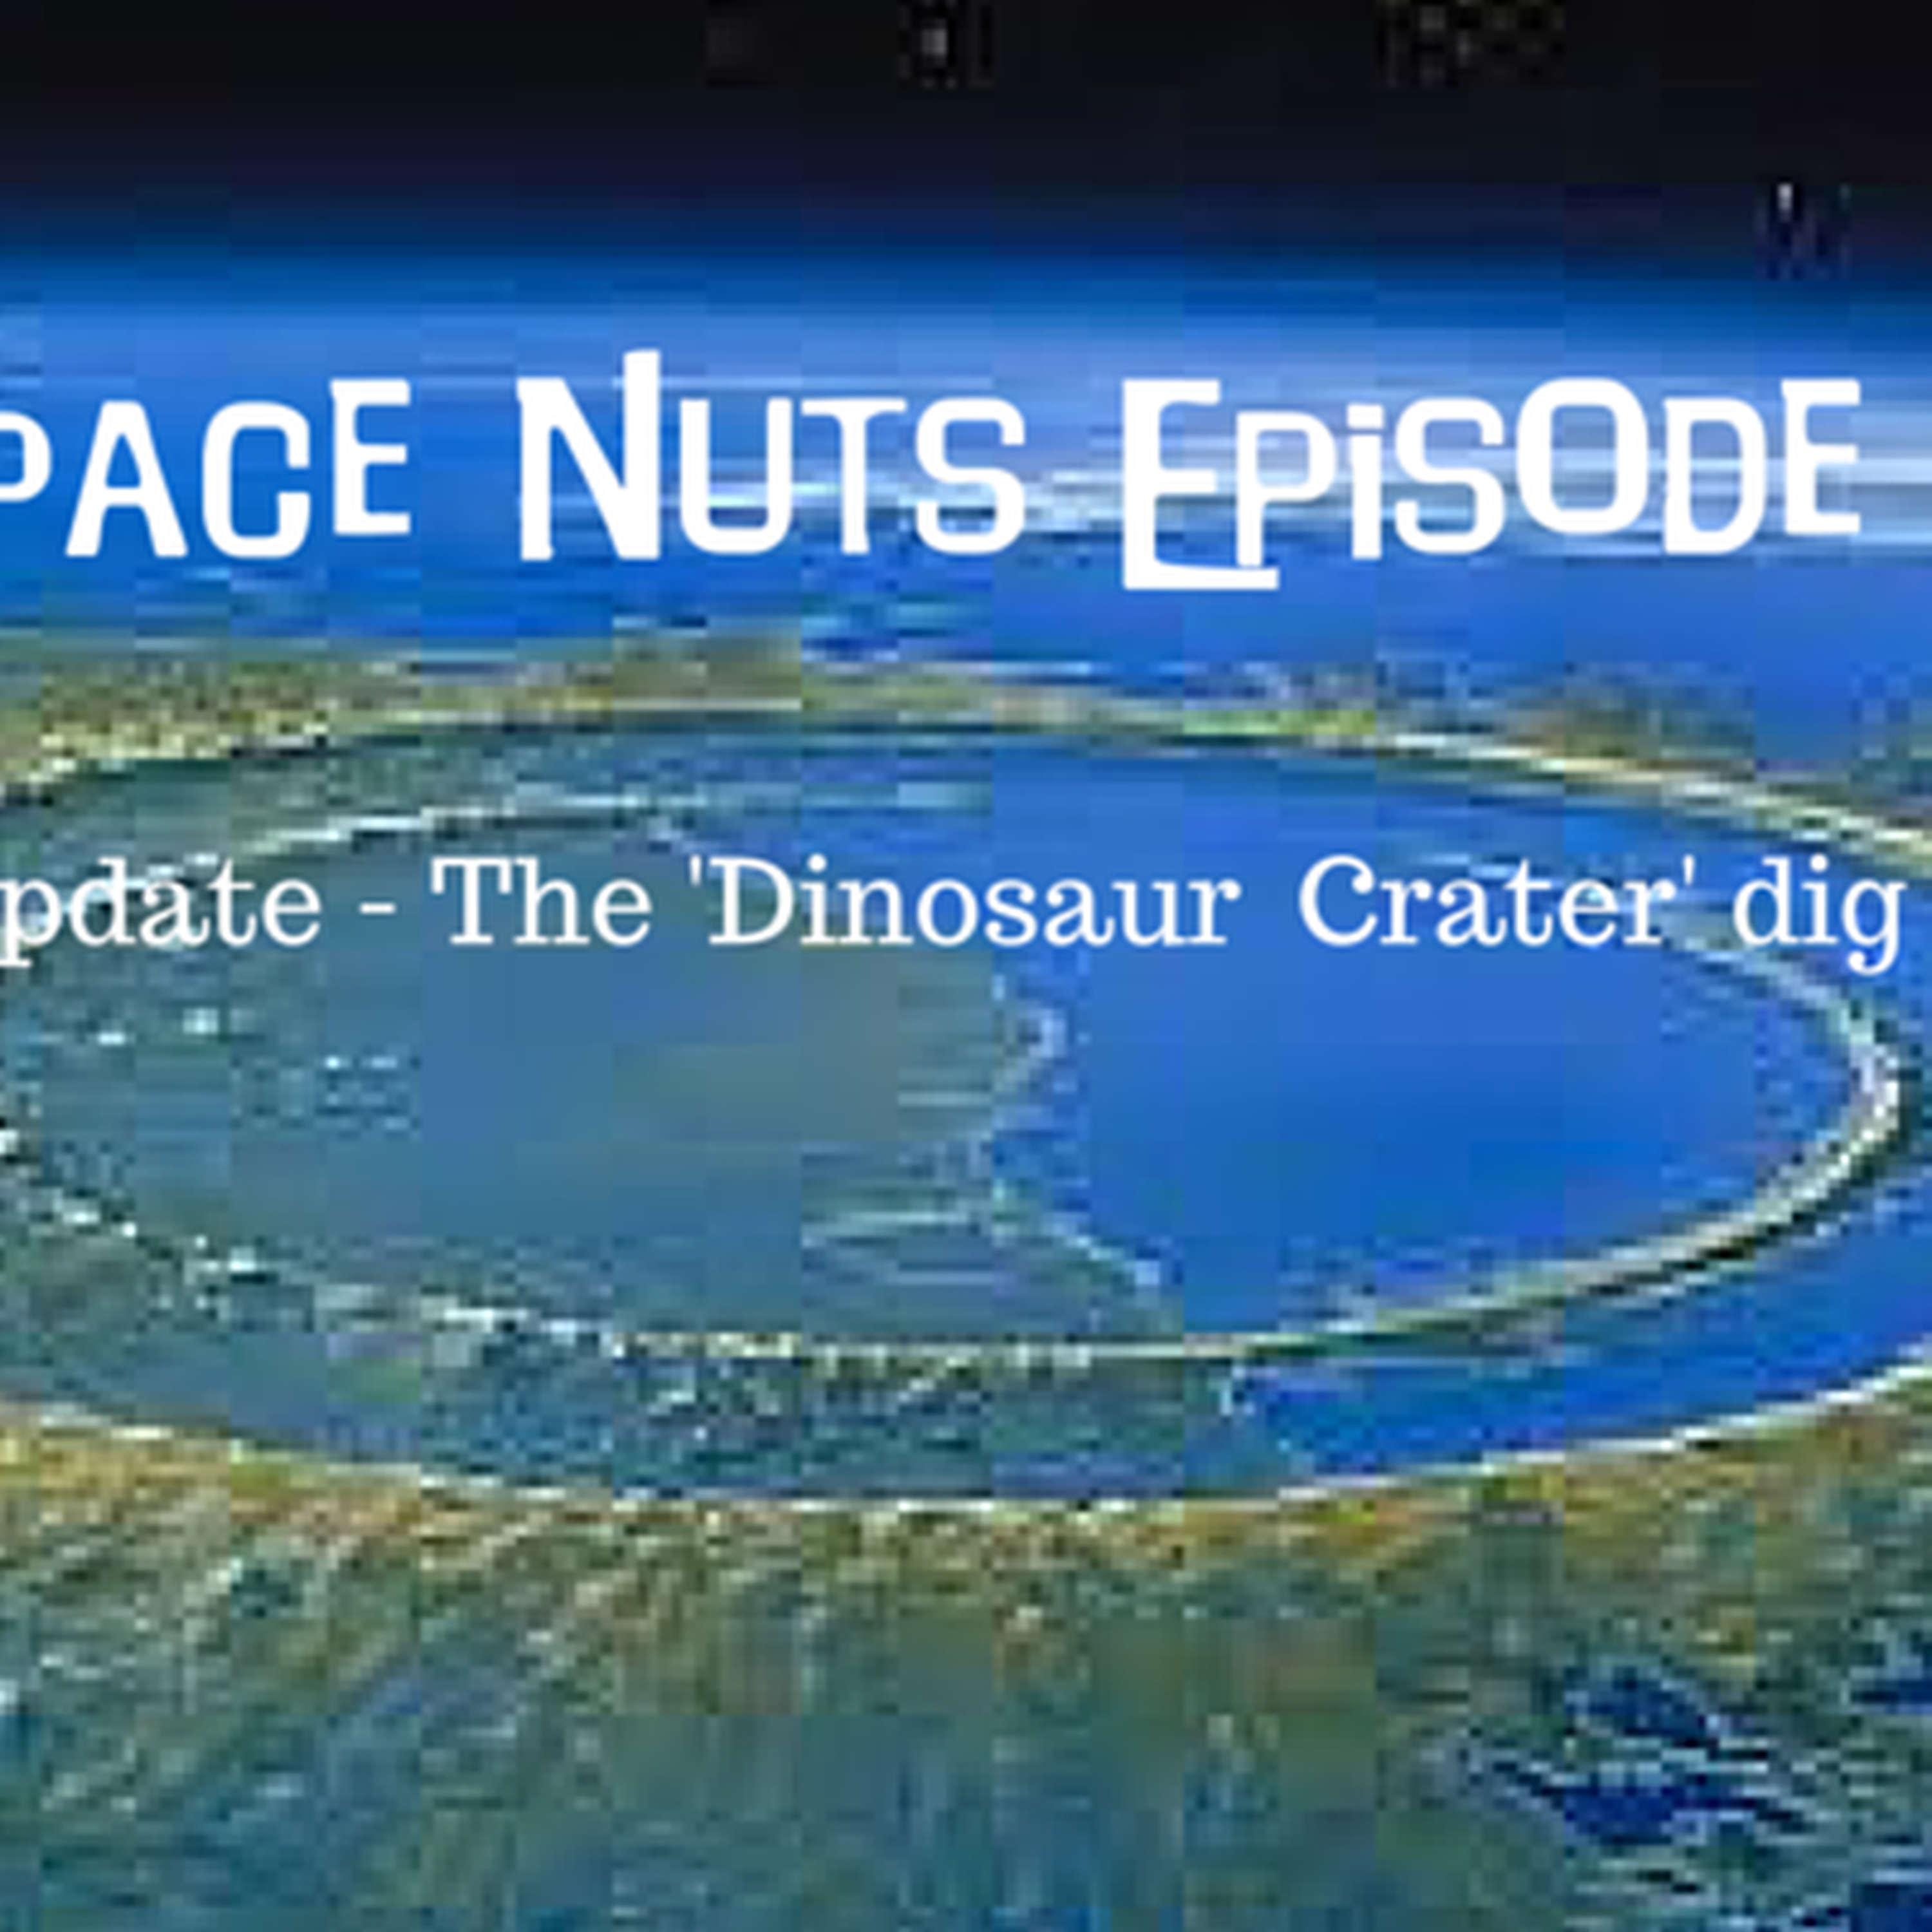 22: Space Nuts Episode 21 - Update: The 'Dinosaur Crater' dig....